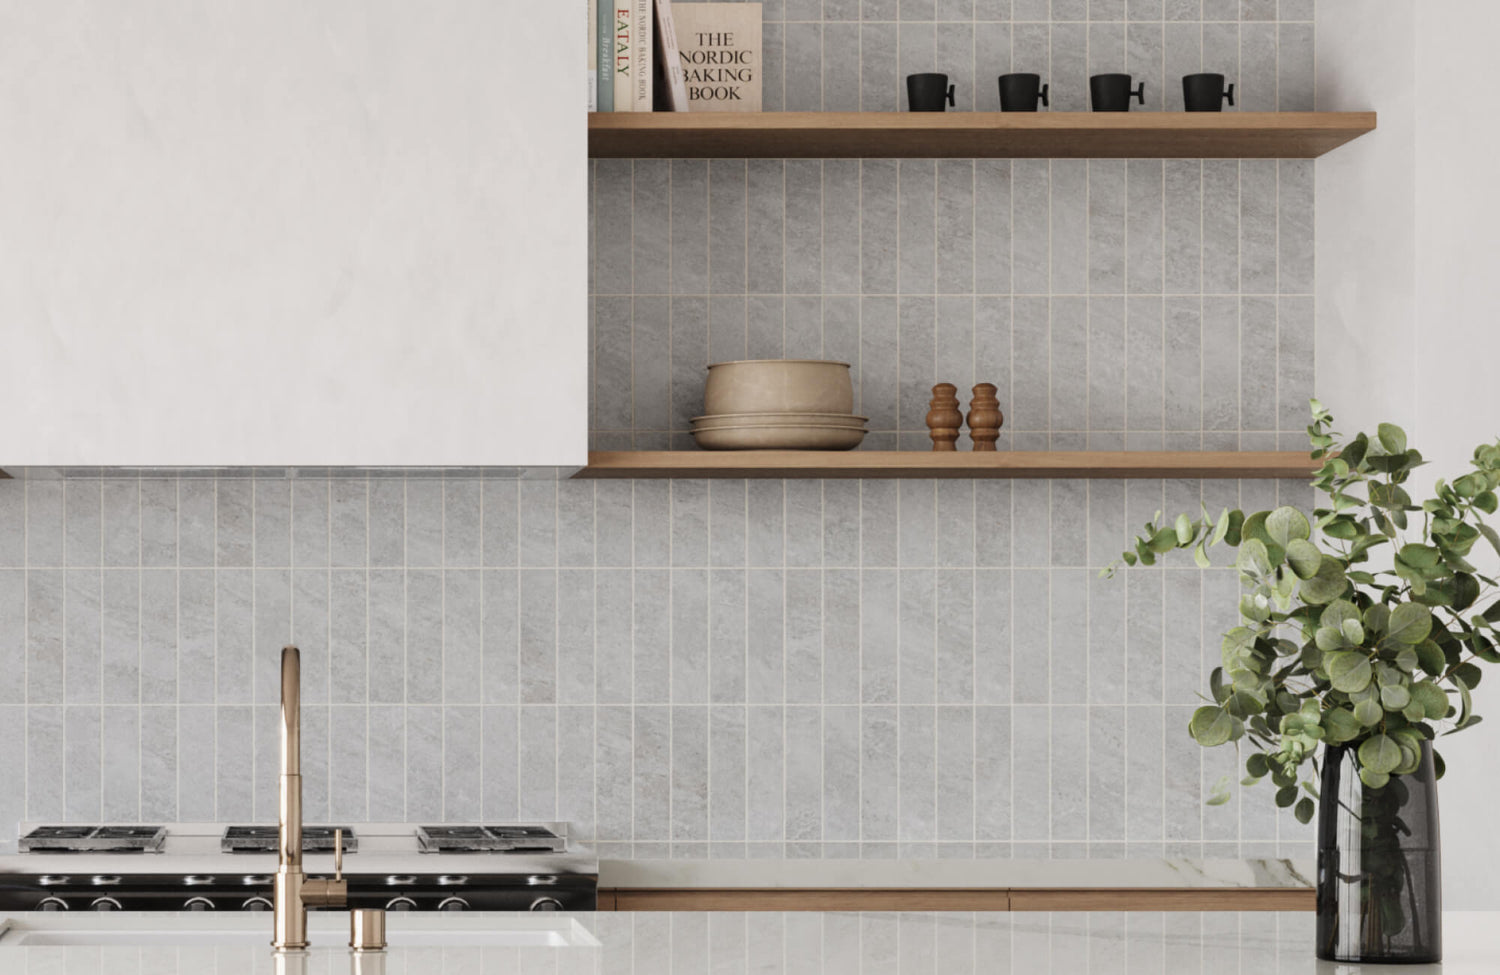 Close-up of a kitchen with light grey vertical subway tile backsplash, wooden open shelves displaying kitchen items, and a sleek faucet in front 